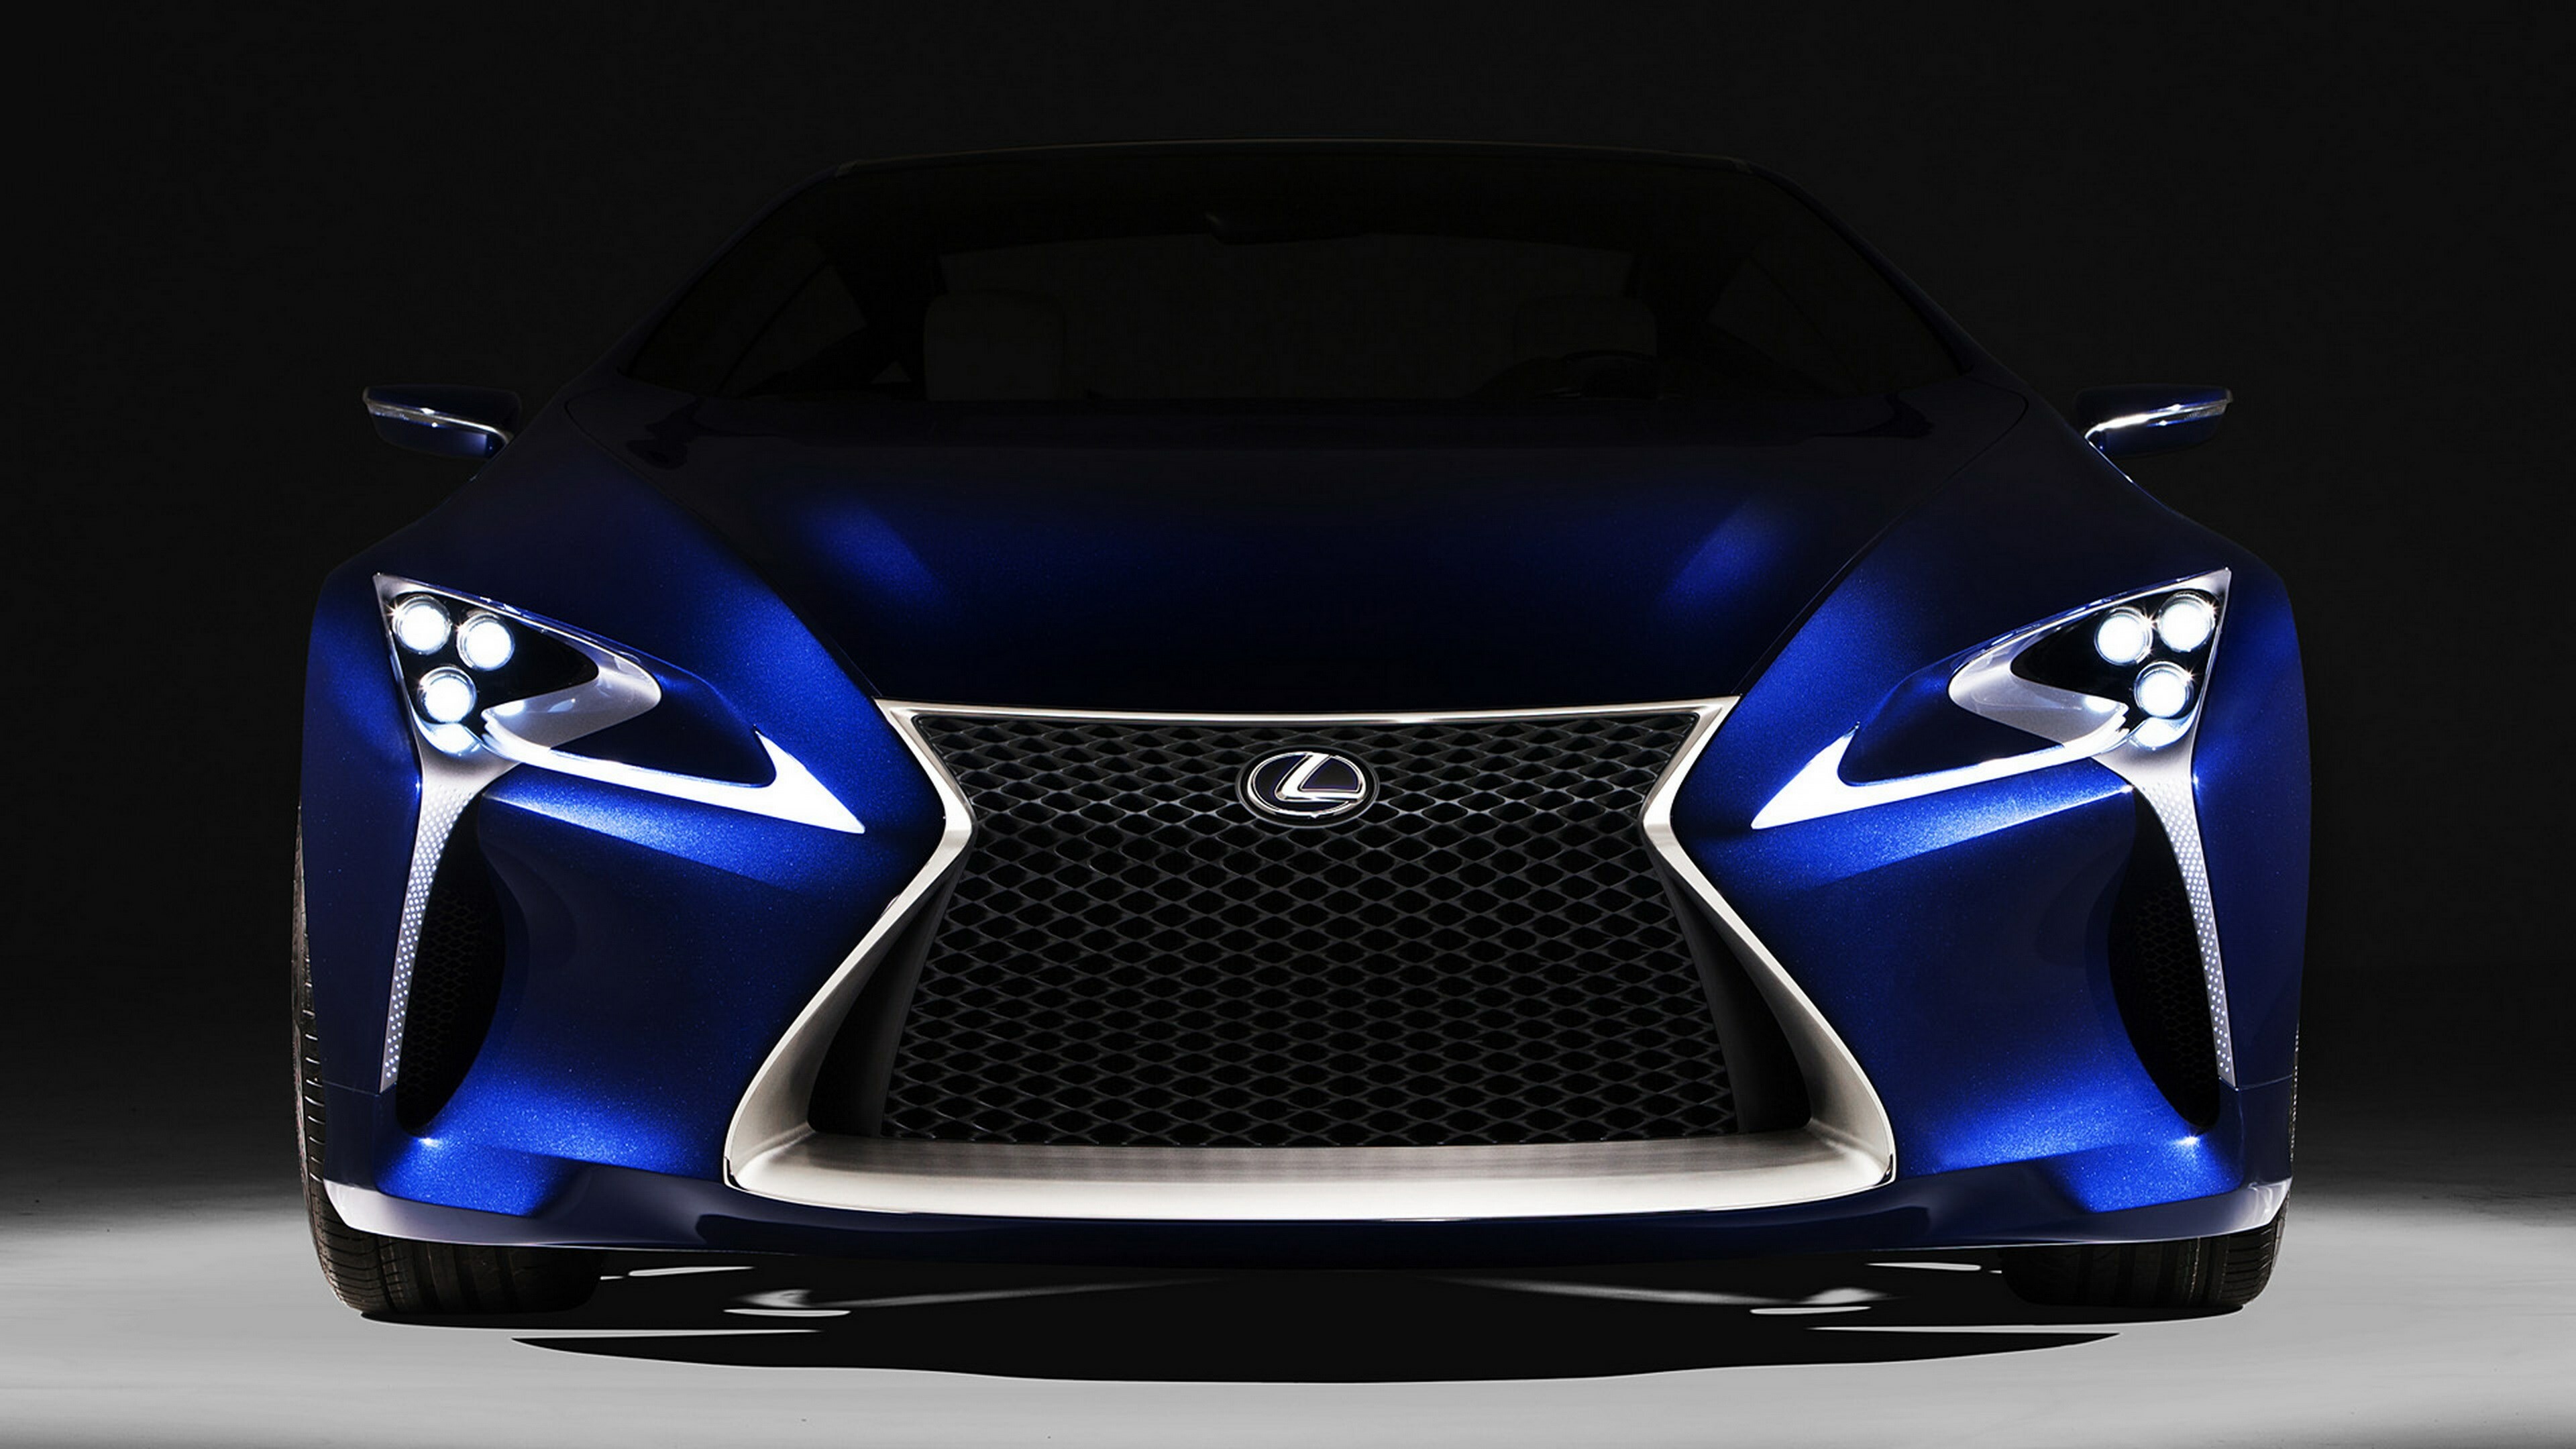 Lexus: The luxury vehicle brand owned by the Toyota Motor Corporation. 3840x2160 4K Wallpaper.